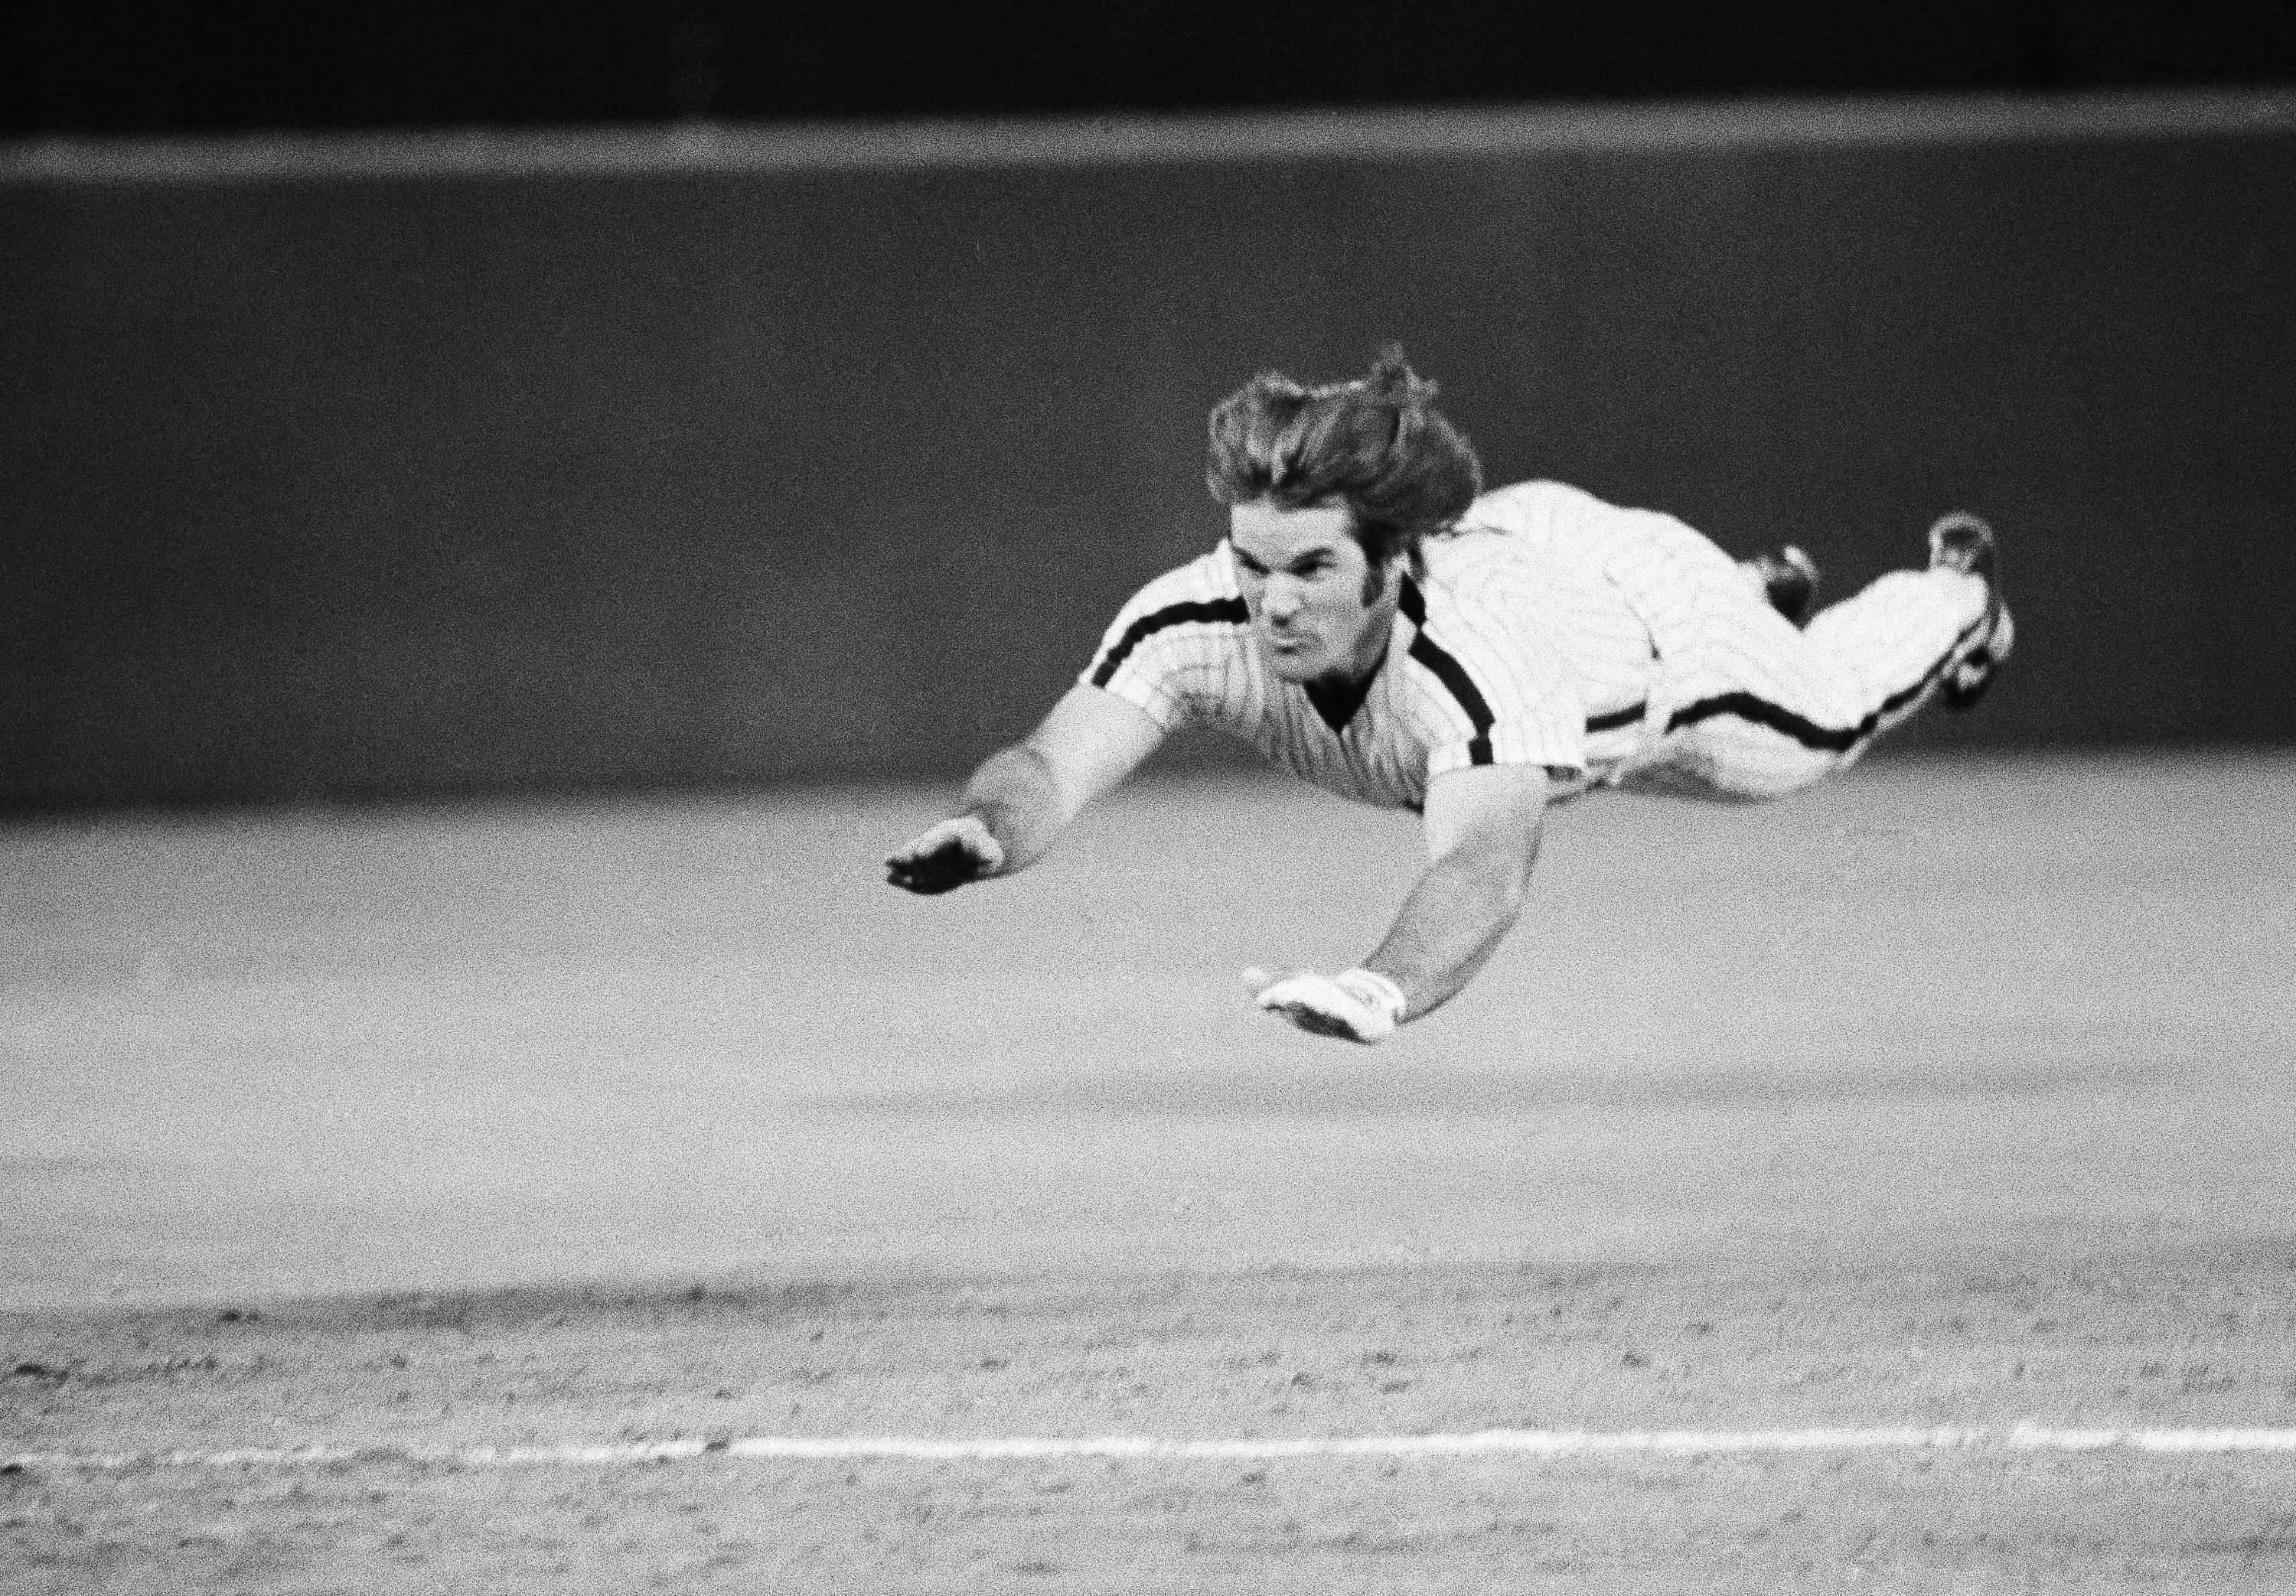 Overrated: Pete Rose - A Very Simple Game